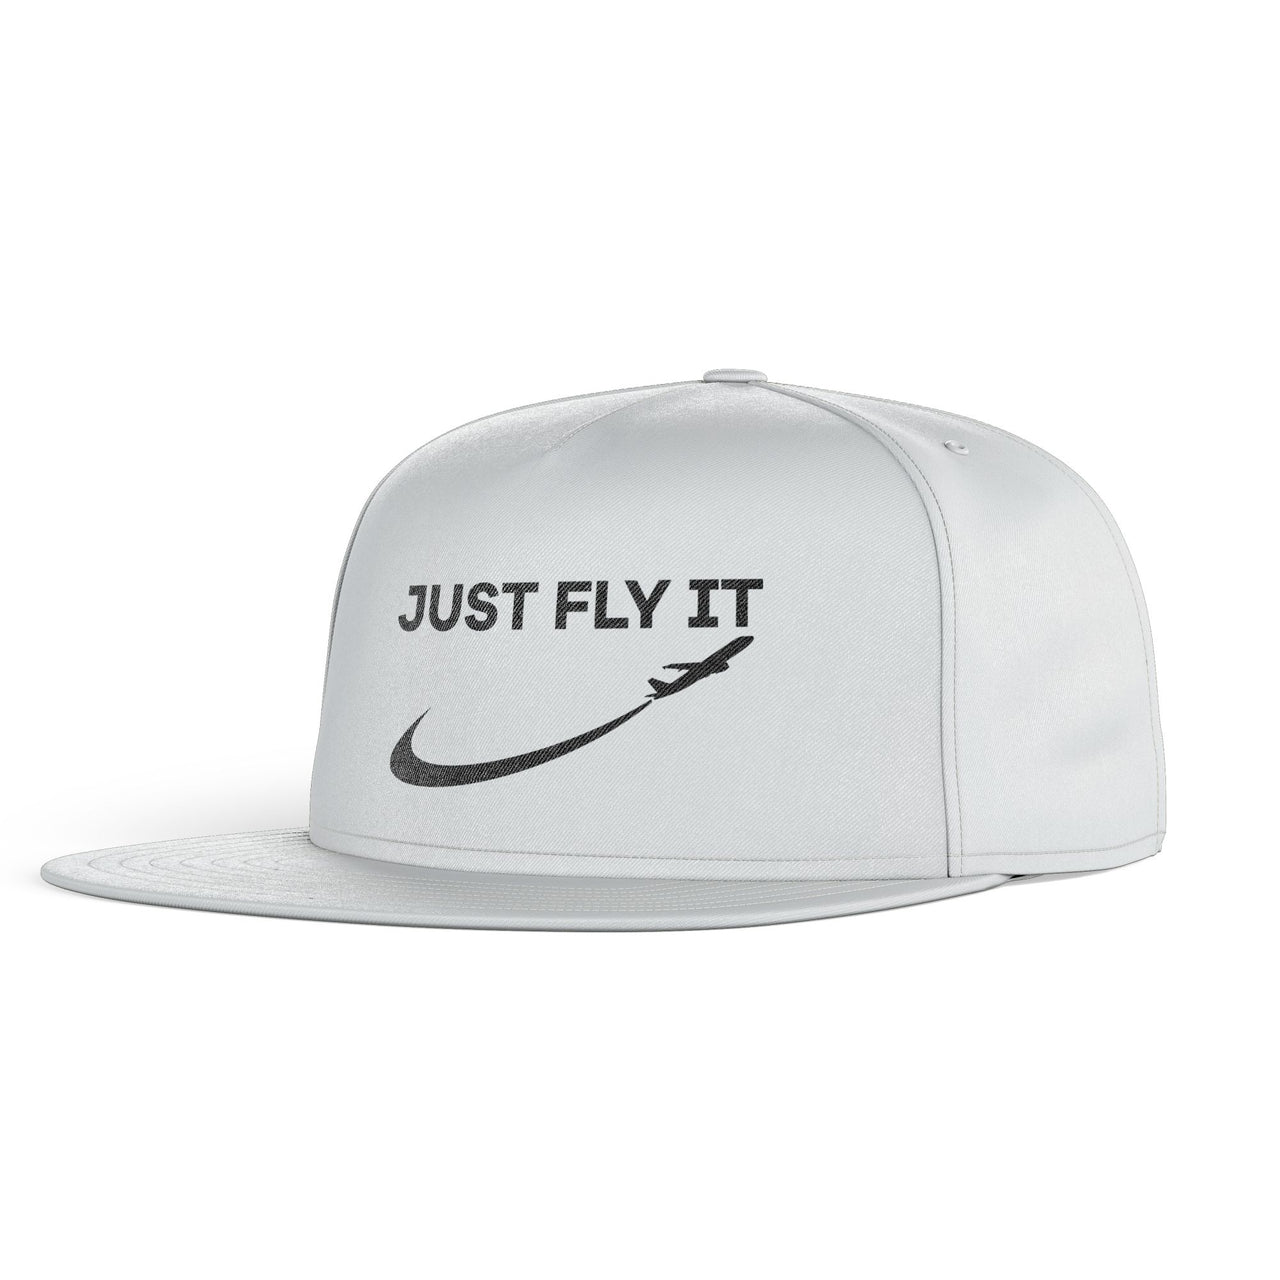 Just Fly It 2 Designed Snapback Caps & Hats